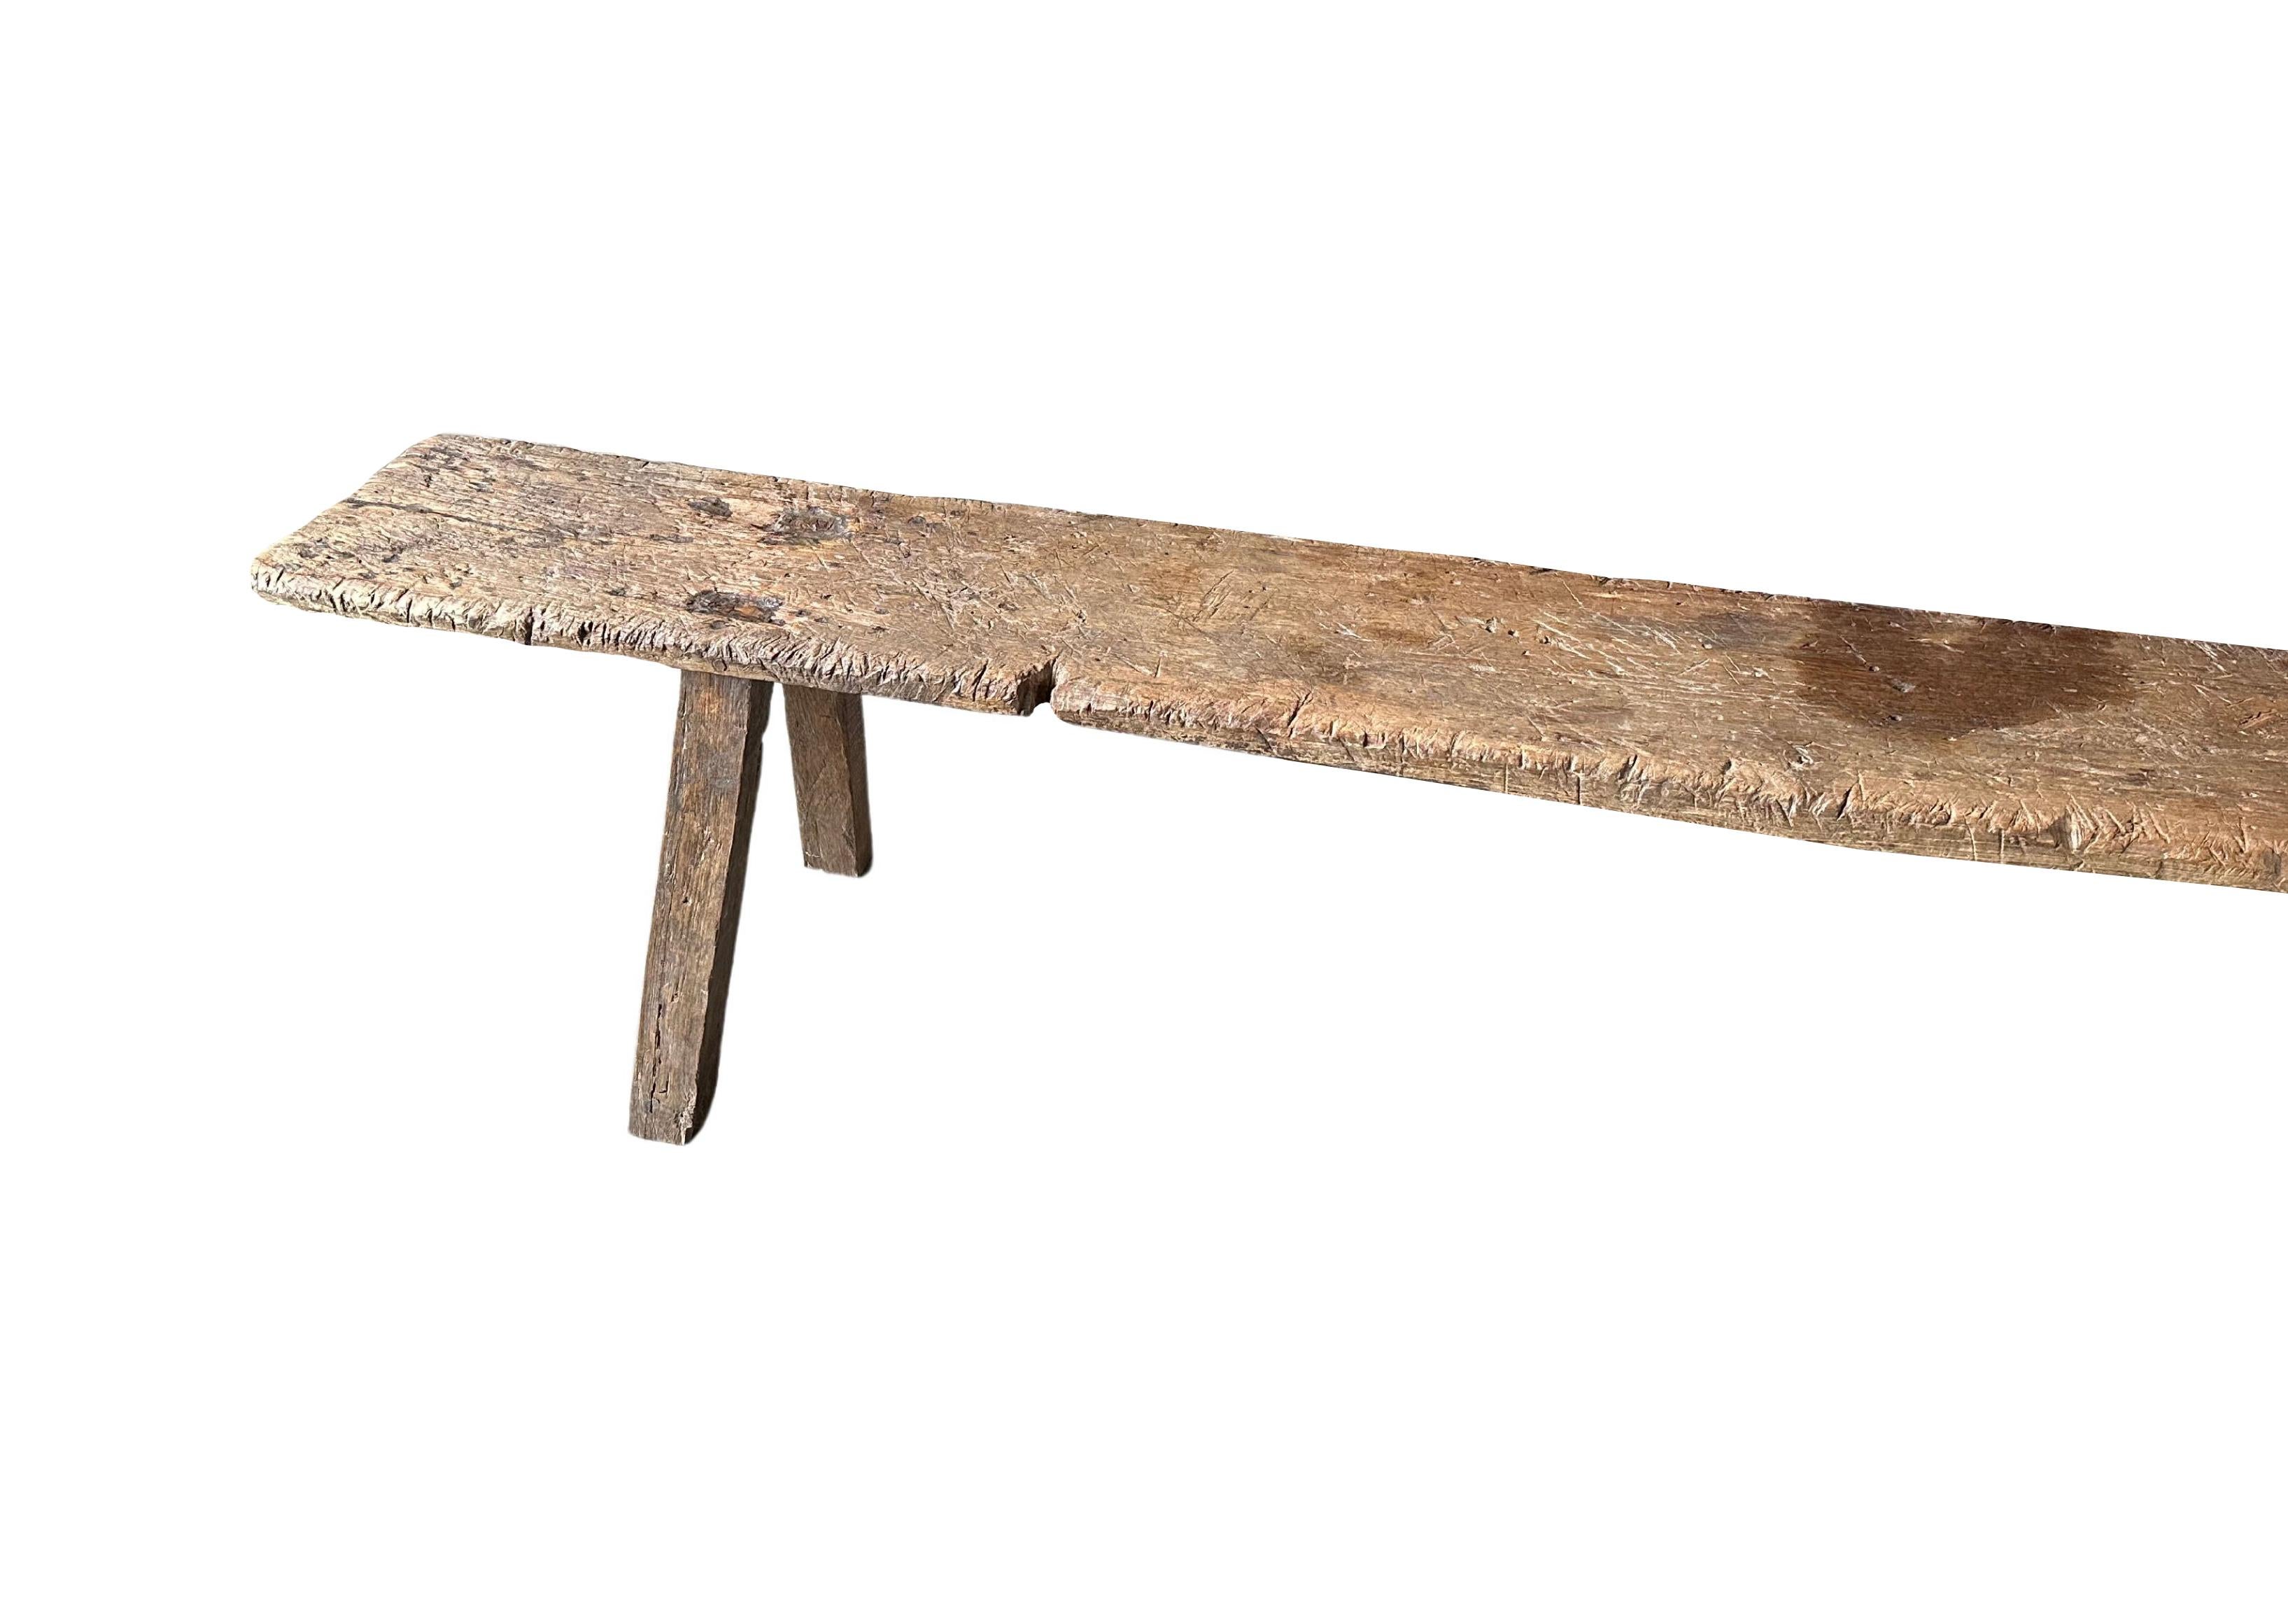 Indonesian Sculptural Teak Bench Hand-Carved from Madura Island, Java, Indonesia, C. 1950